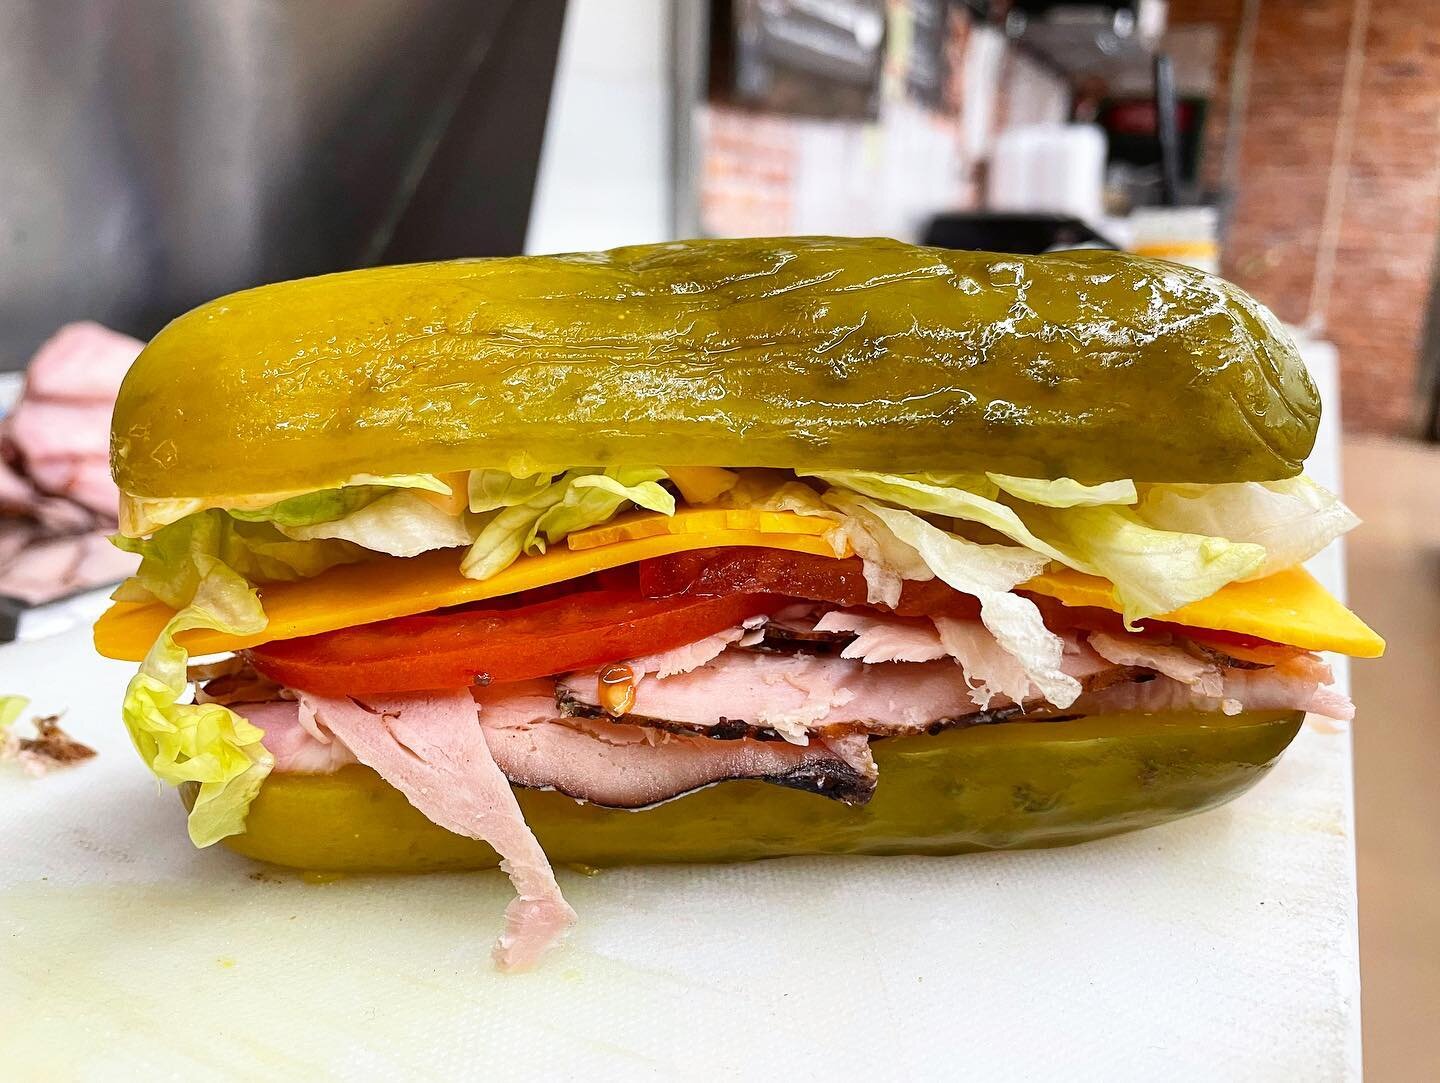 We&rsquo;d like to introduce you to the Ribwich&rsquo;s long lost cousin, the Picklewich! 
_
This is a unique carb free sandwich option with a sweet zing to it! 
_
If you&rsquo;re ever wanting to try one out ask our talented deli staff and they&rsquo